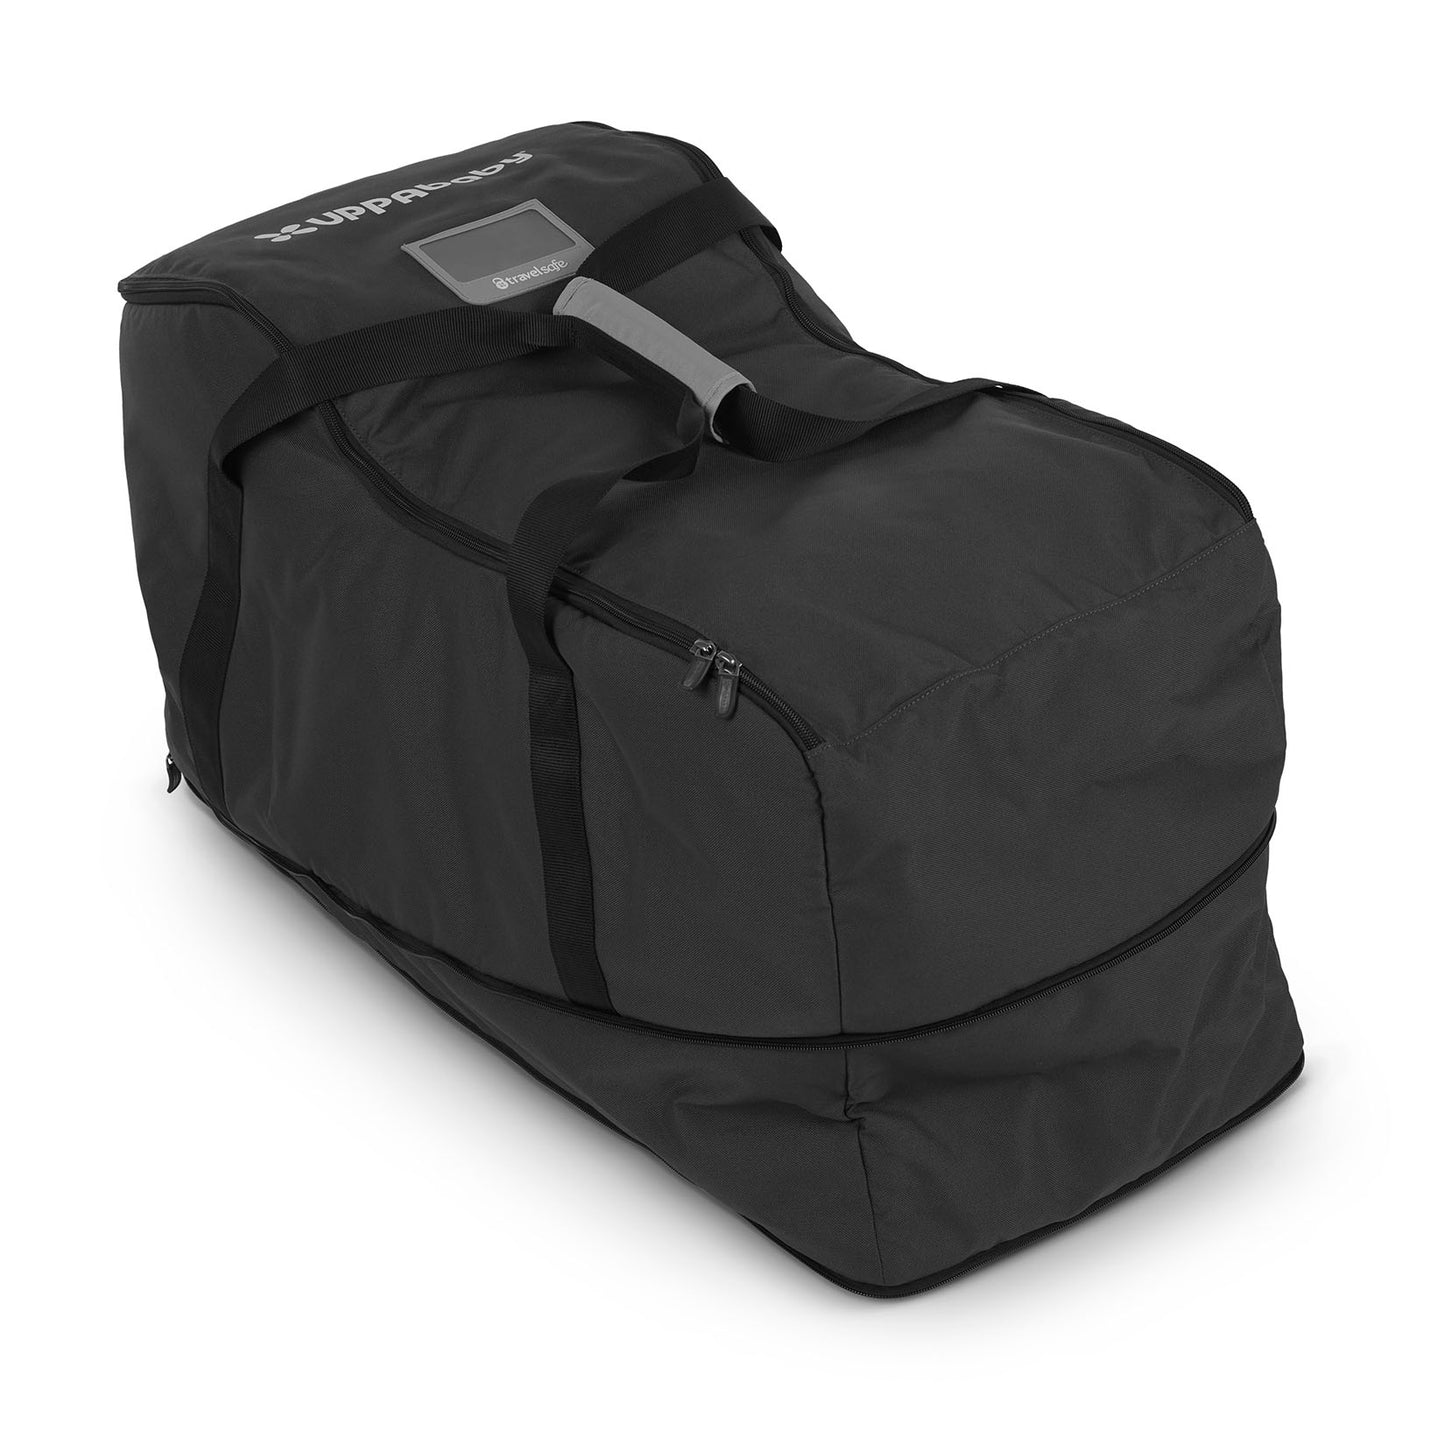 Travel Bag - MESA  - DROPSHIP ITEM - PLEASE ALLOW ONE WEEK FOR PROCESSING